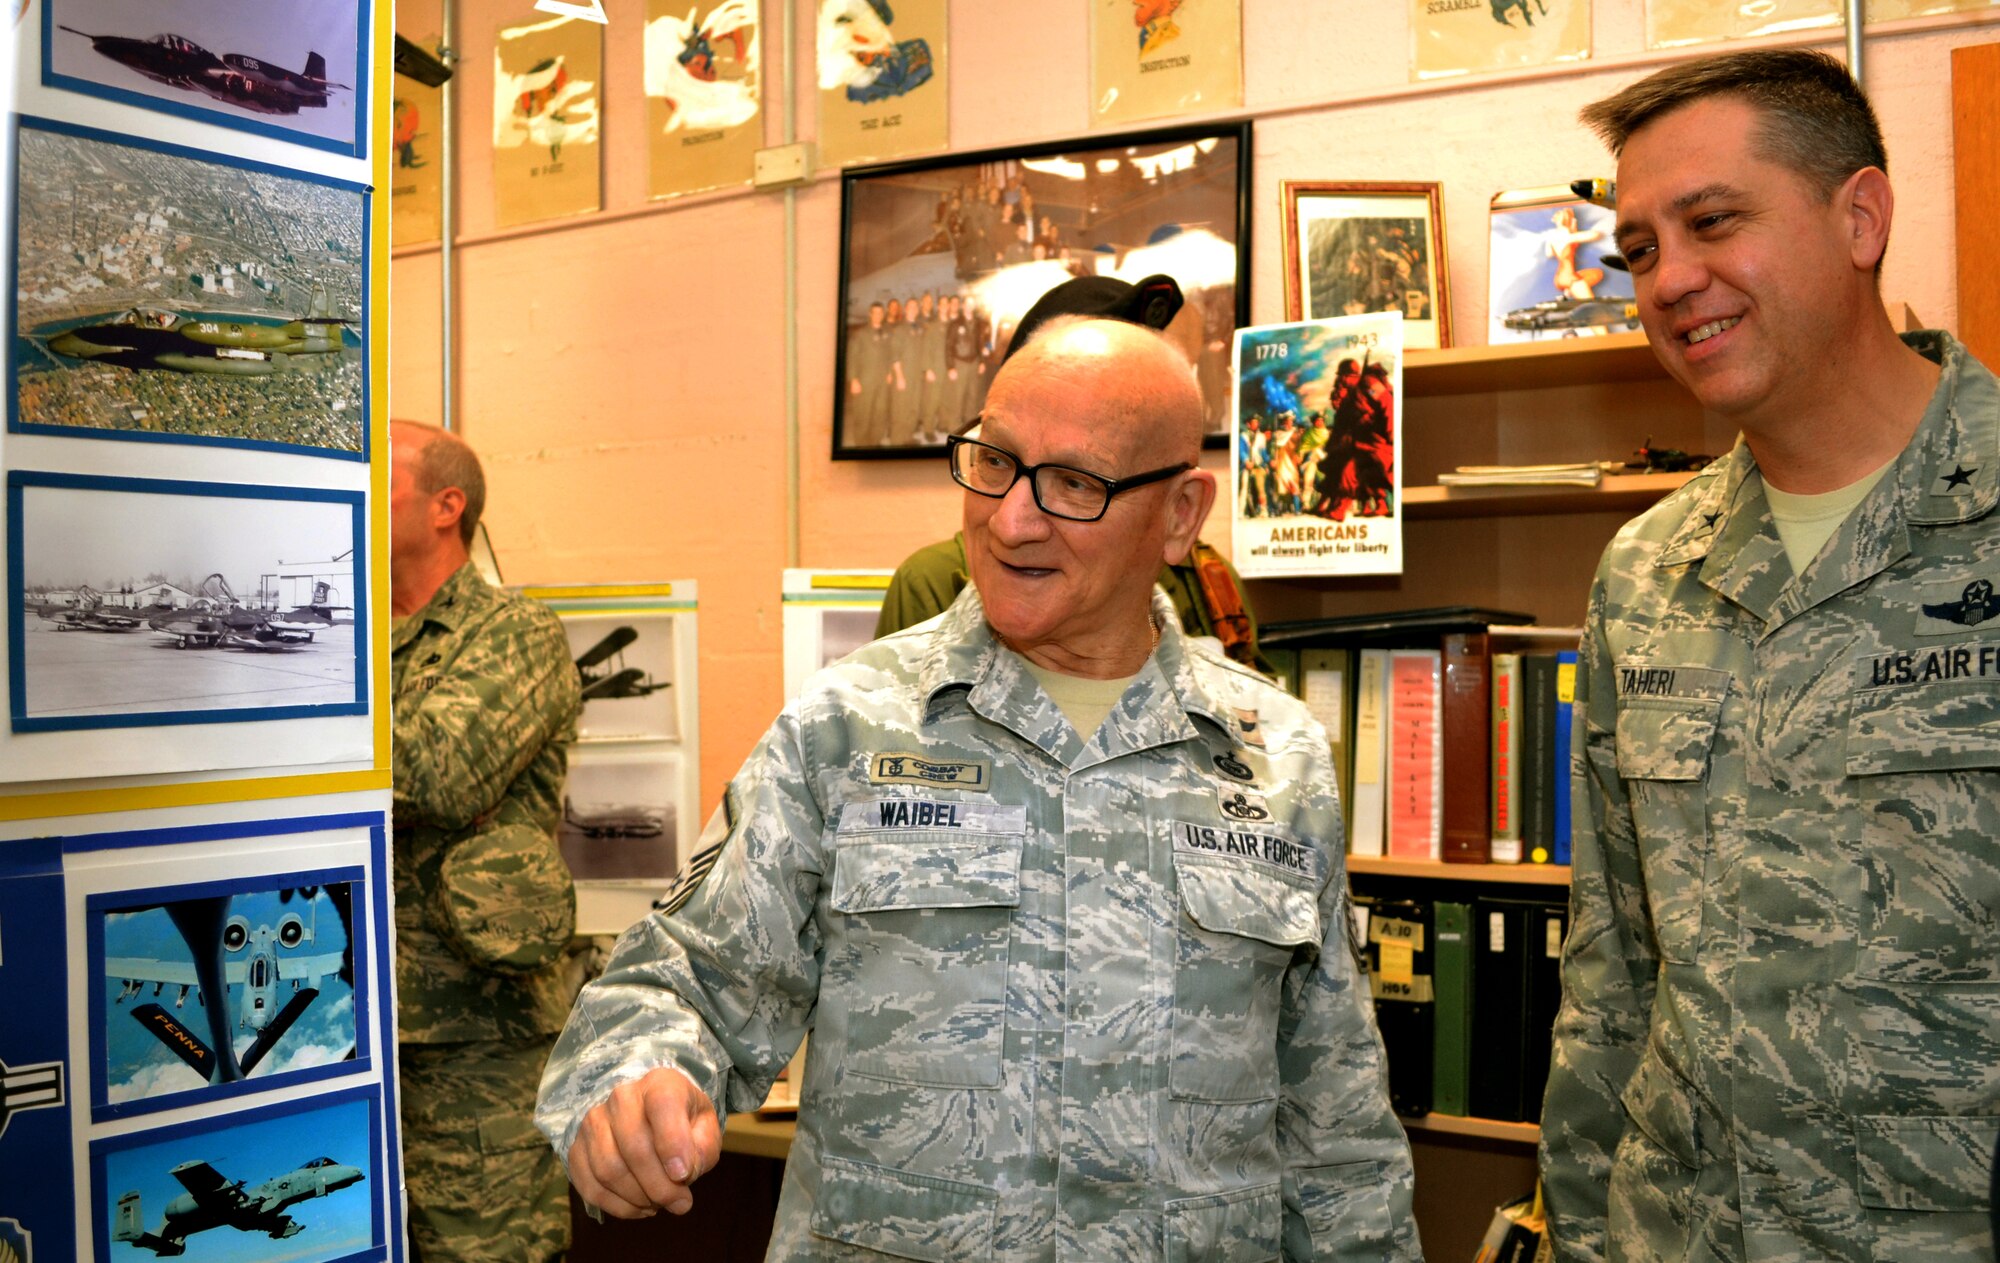 Retired Master Sgt. Jim Waibel, a historian who volunteers at the 111th Attack Wing, presents a display to Brig. Gen. Michael R. Taheri, the Commander of the Air National Guard Readiness Center, Joint Base Andrews, Maryland, in the Wing Historian Office at Horsham Air Guard Station, Pa., March 12, 2016. Taheri began his base tour viewing the Wing’s artifacts and exhibitions before proceeding to other units. (U.S. Air National Guard photo by Tech. Sgt. Andria Allmond)